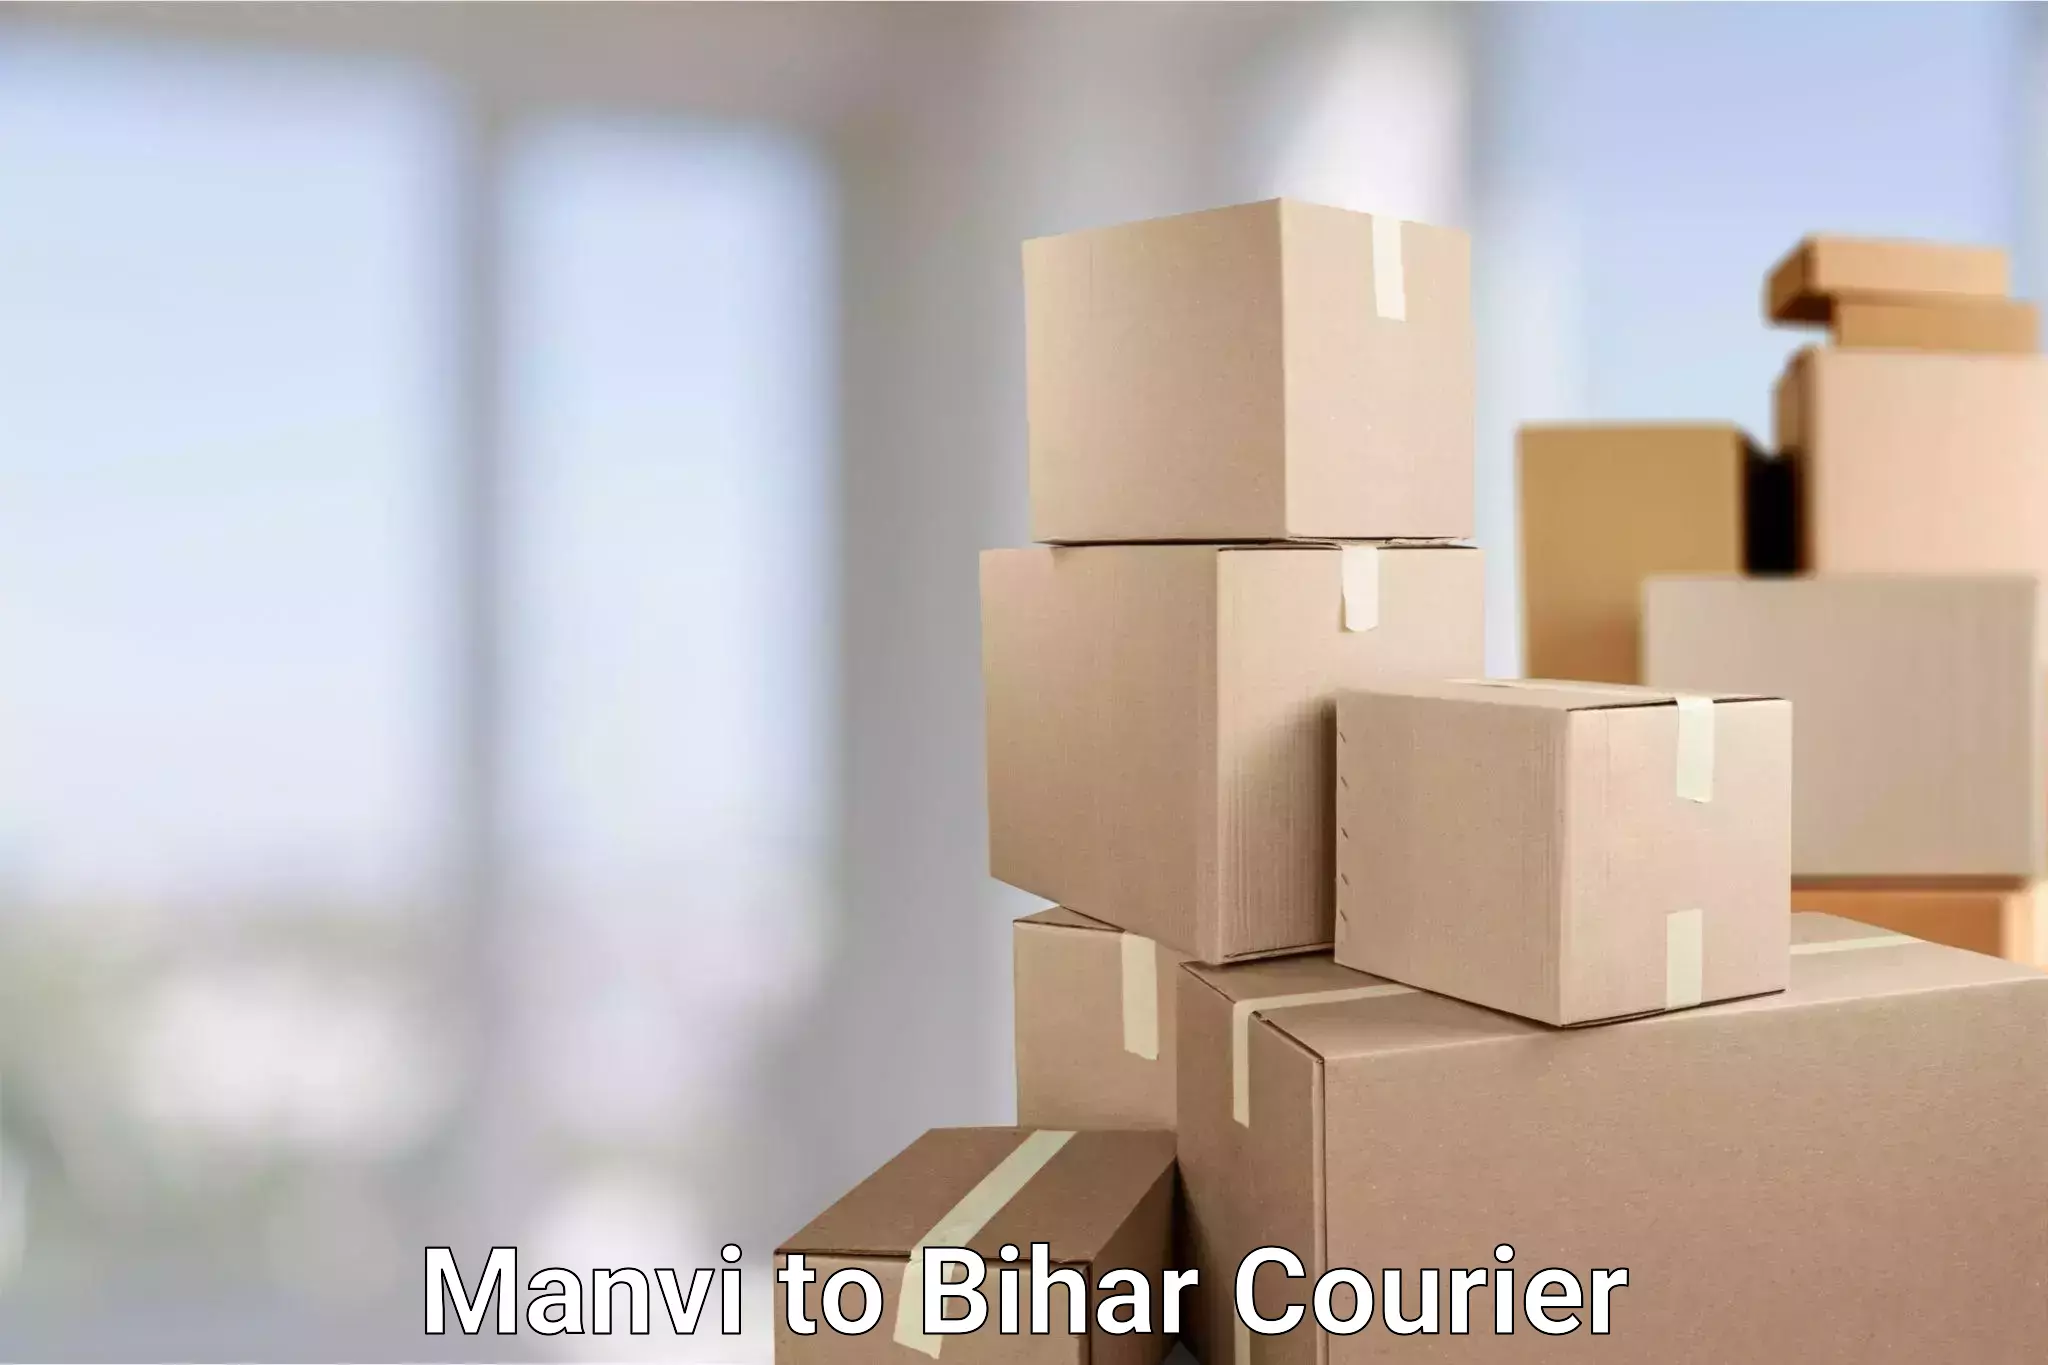 State-of-the-art courier technology Manvi to Hajipur